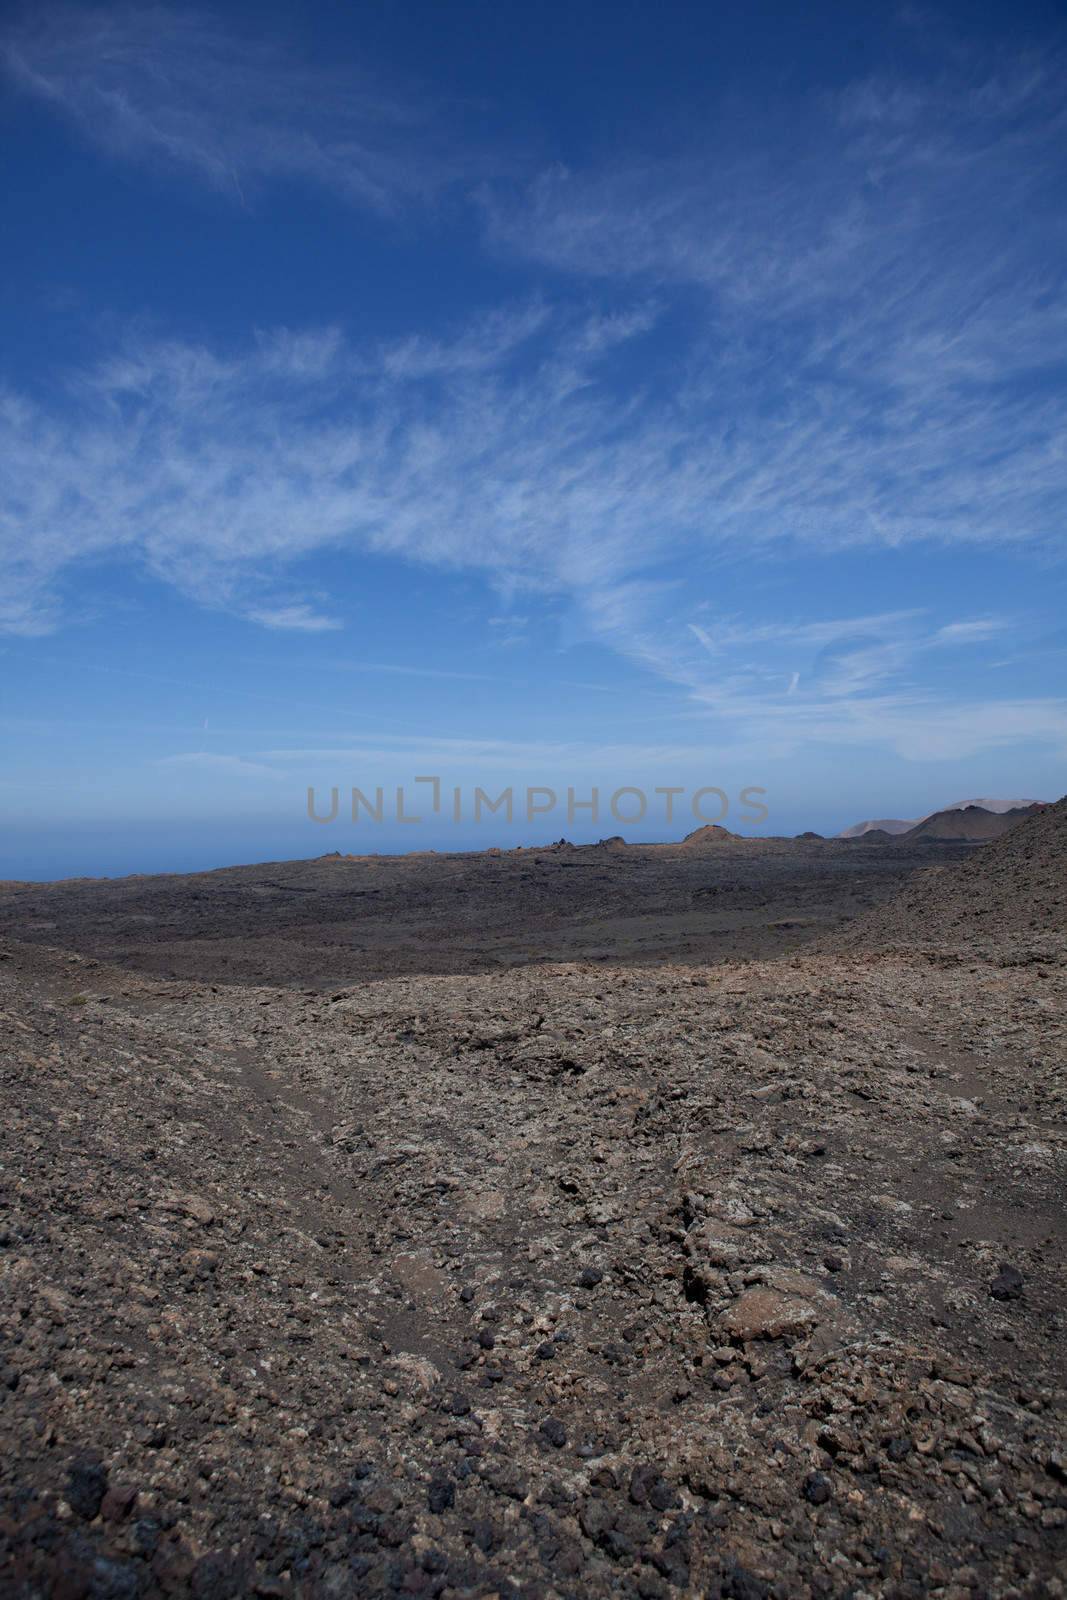 Some place in Lanzarote by SveinOttoJacobsen